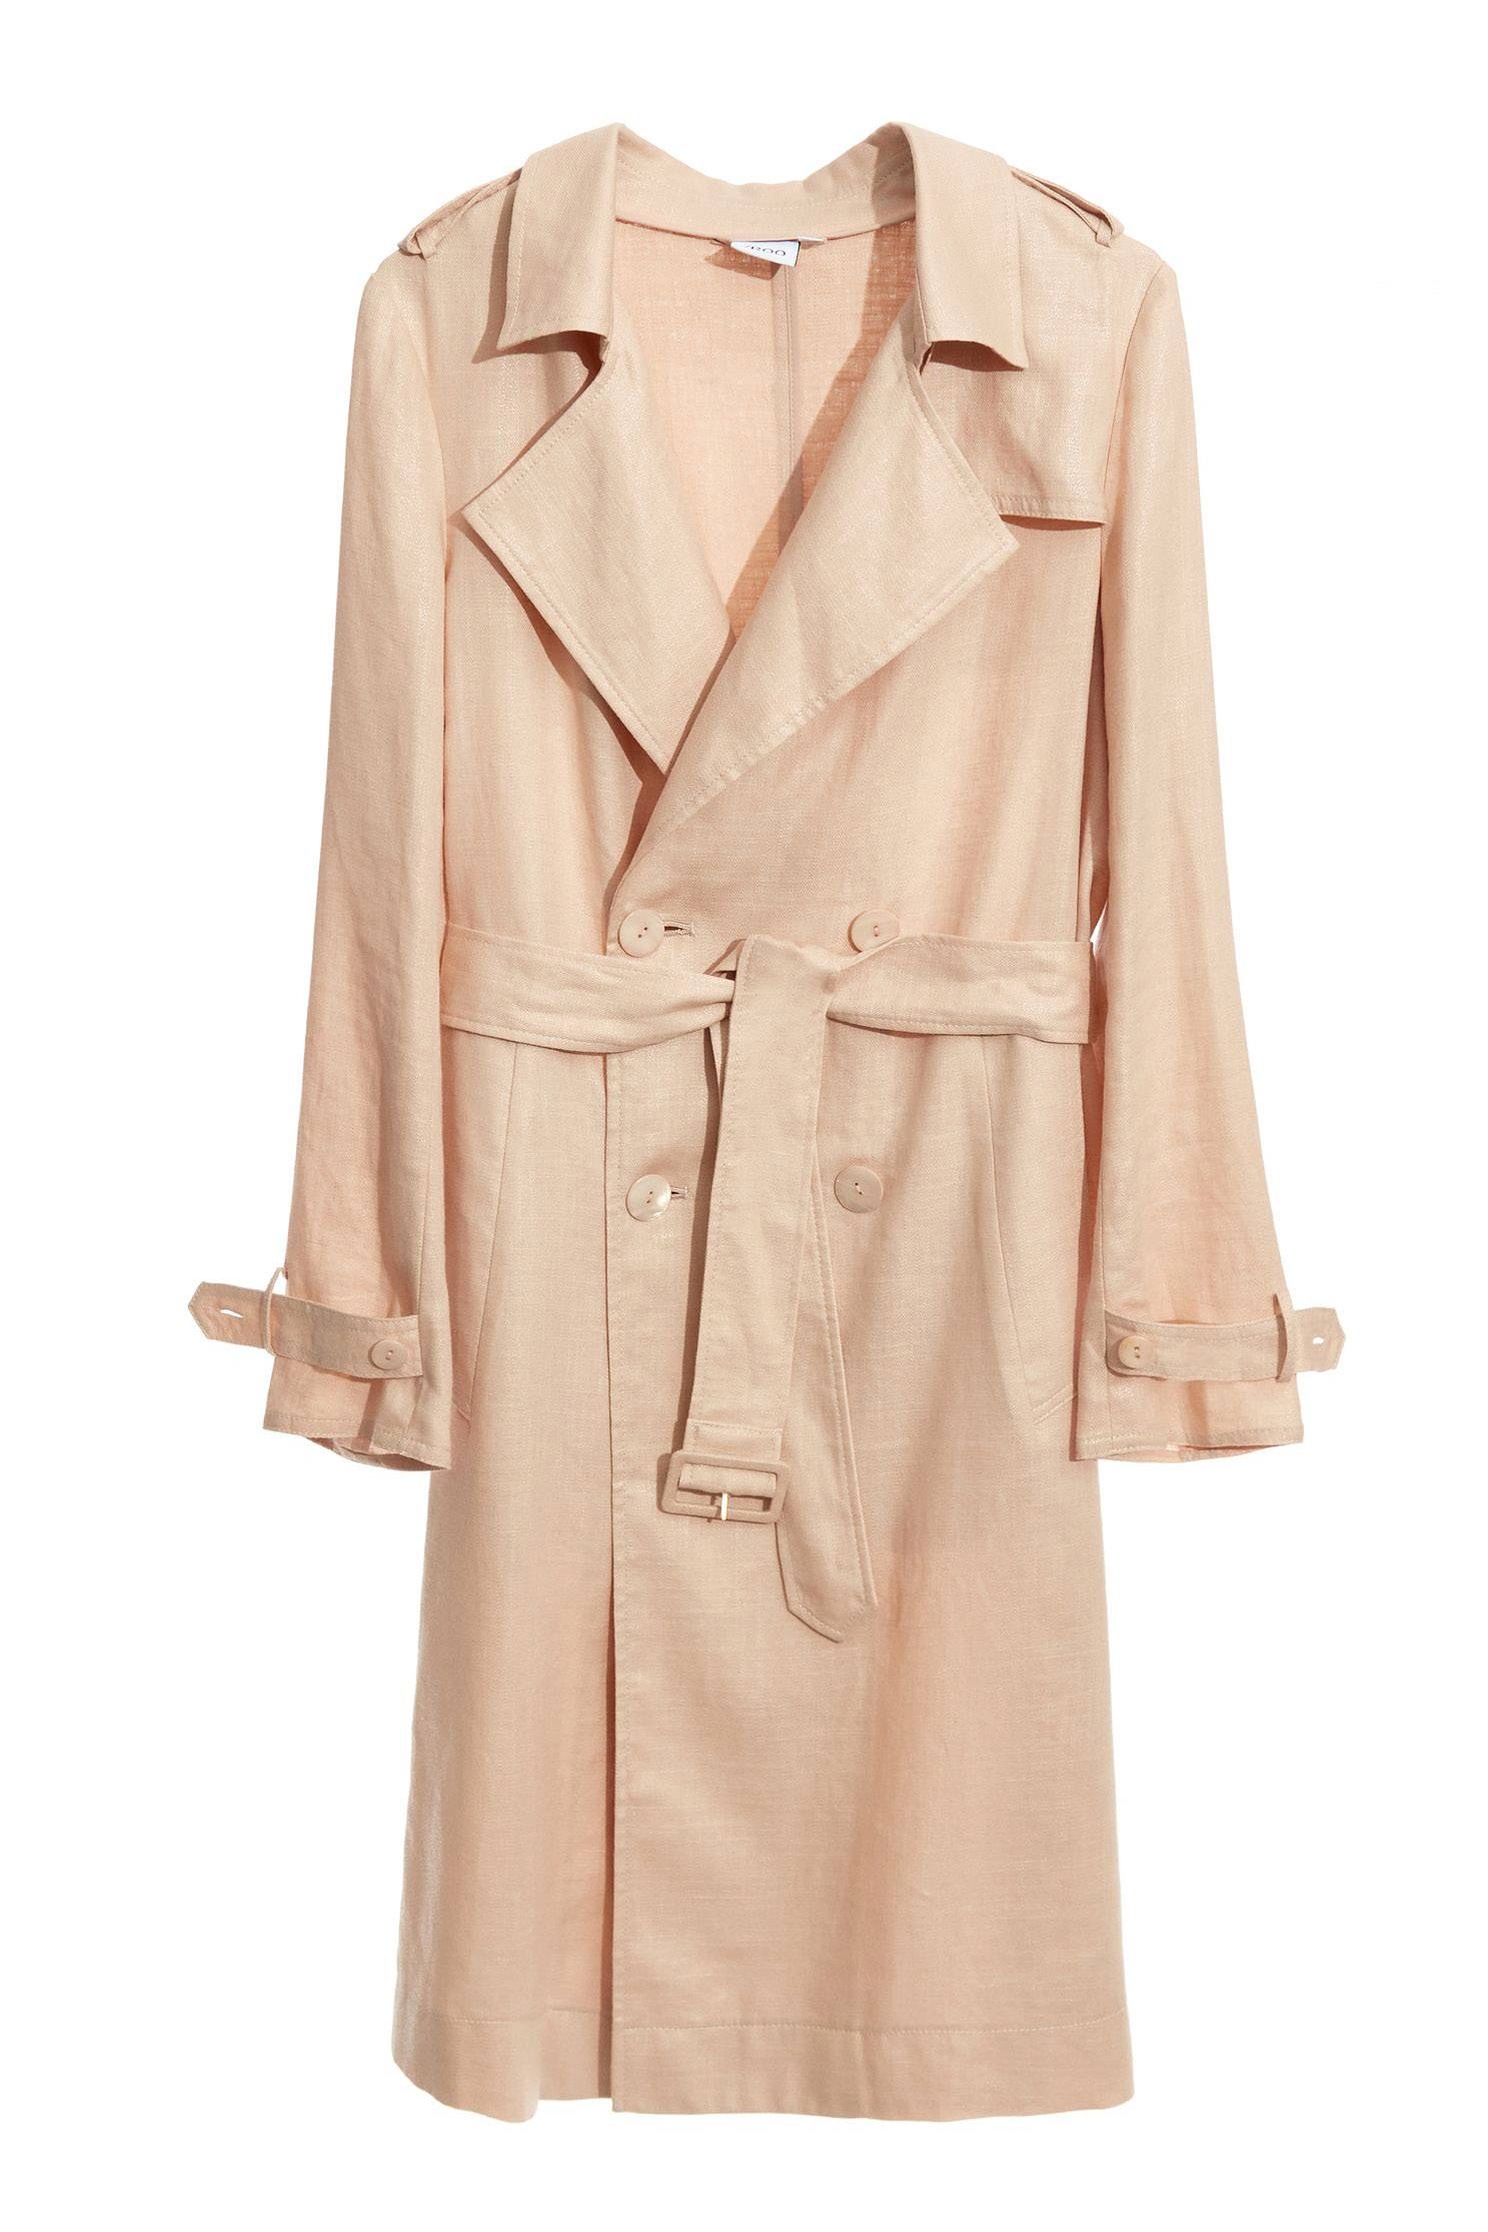 Cotton linen of clarity trench coat,Outfit of the Day,Dress to Impress,Season (AW) Look,Trench coats